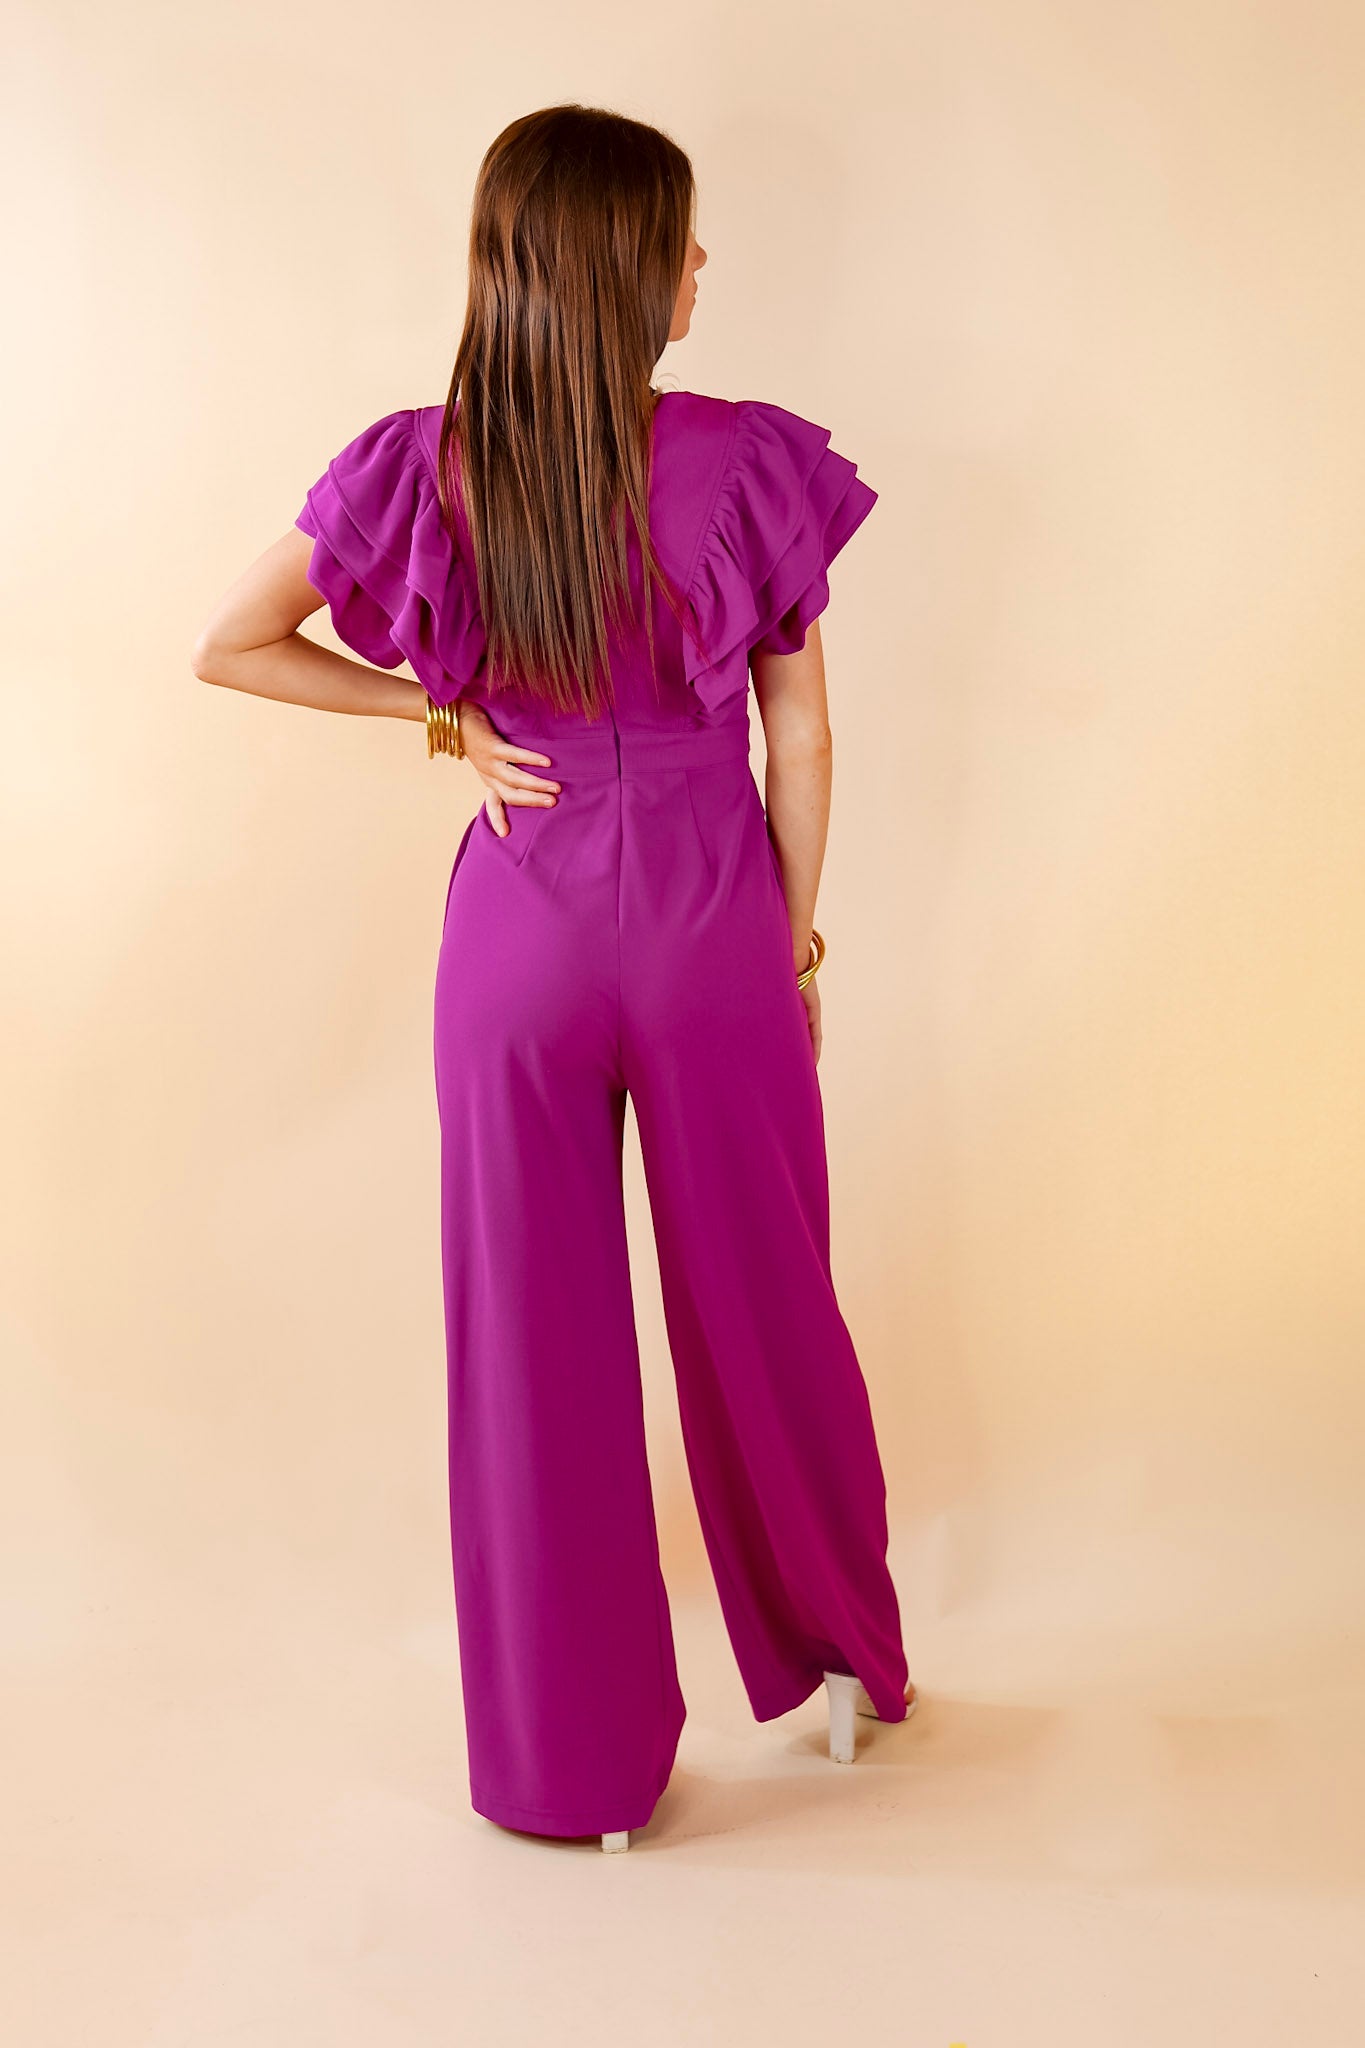 Superstar Style V Neck Jumpsuit with Ruffle Sleeves in Magenta Purple - Giddy Up Glamour Boutique